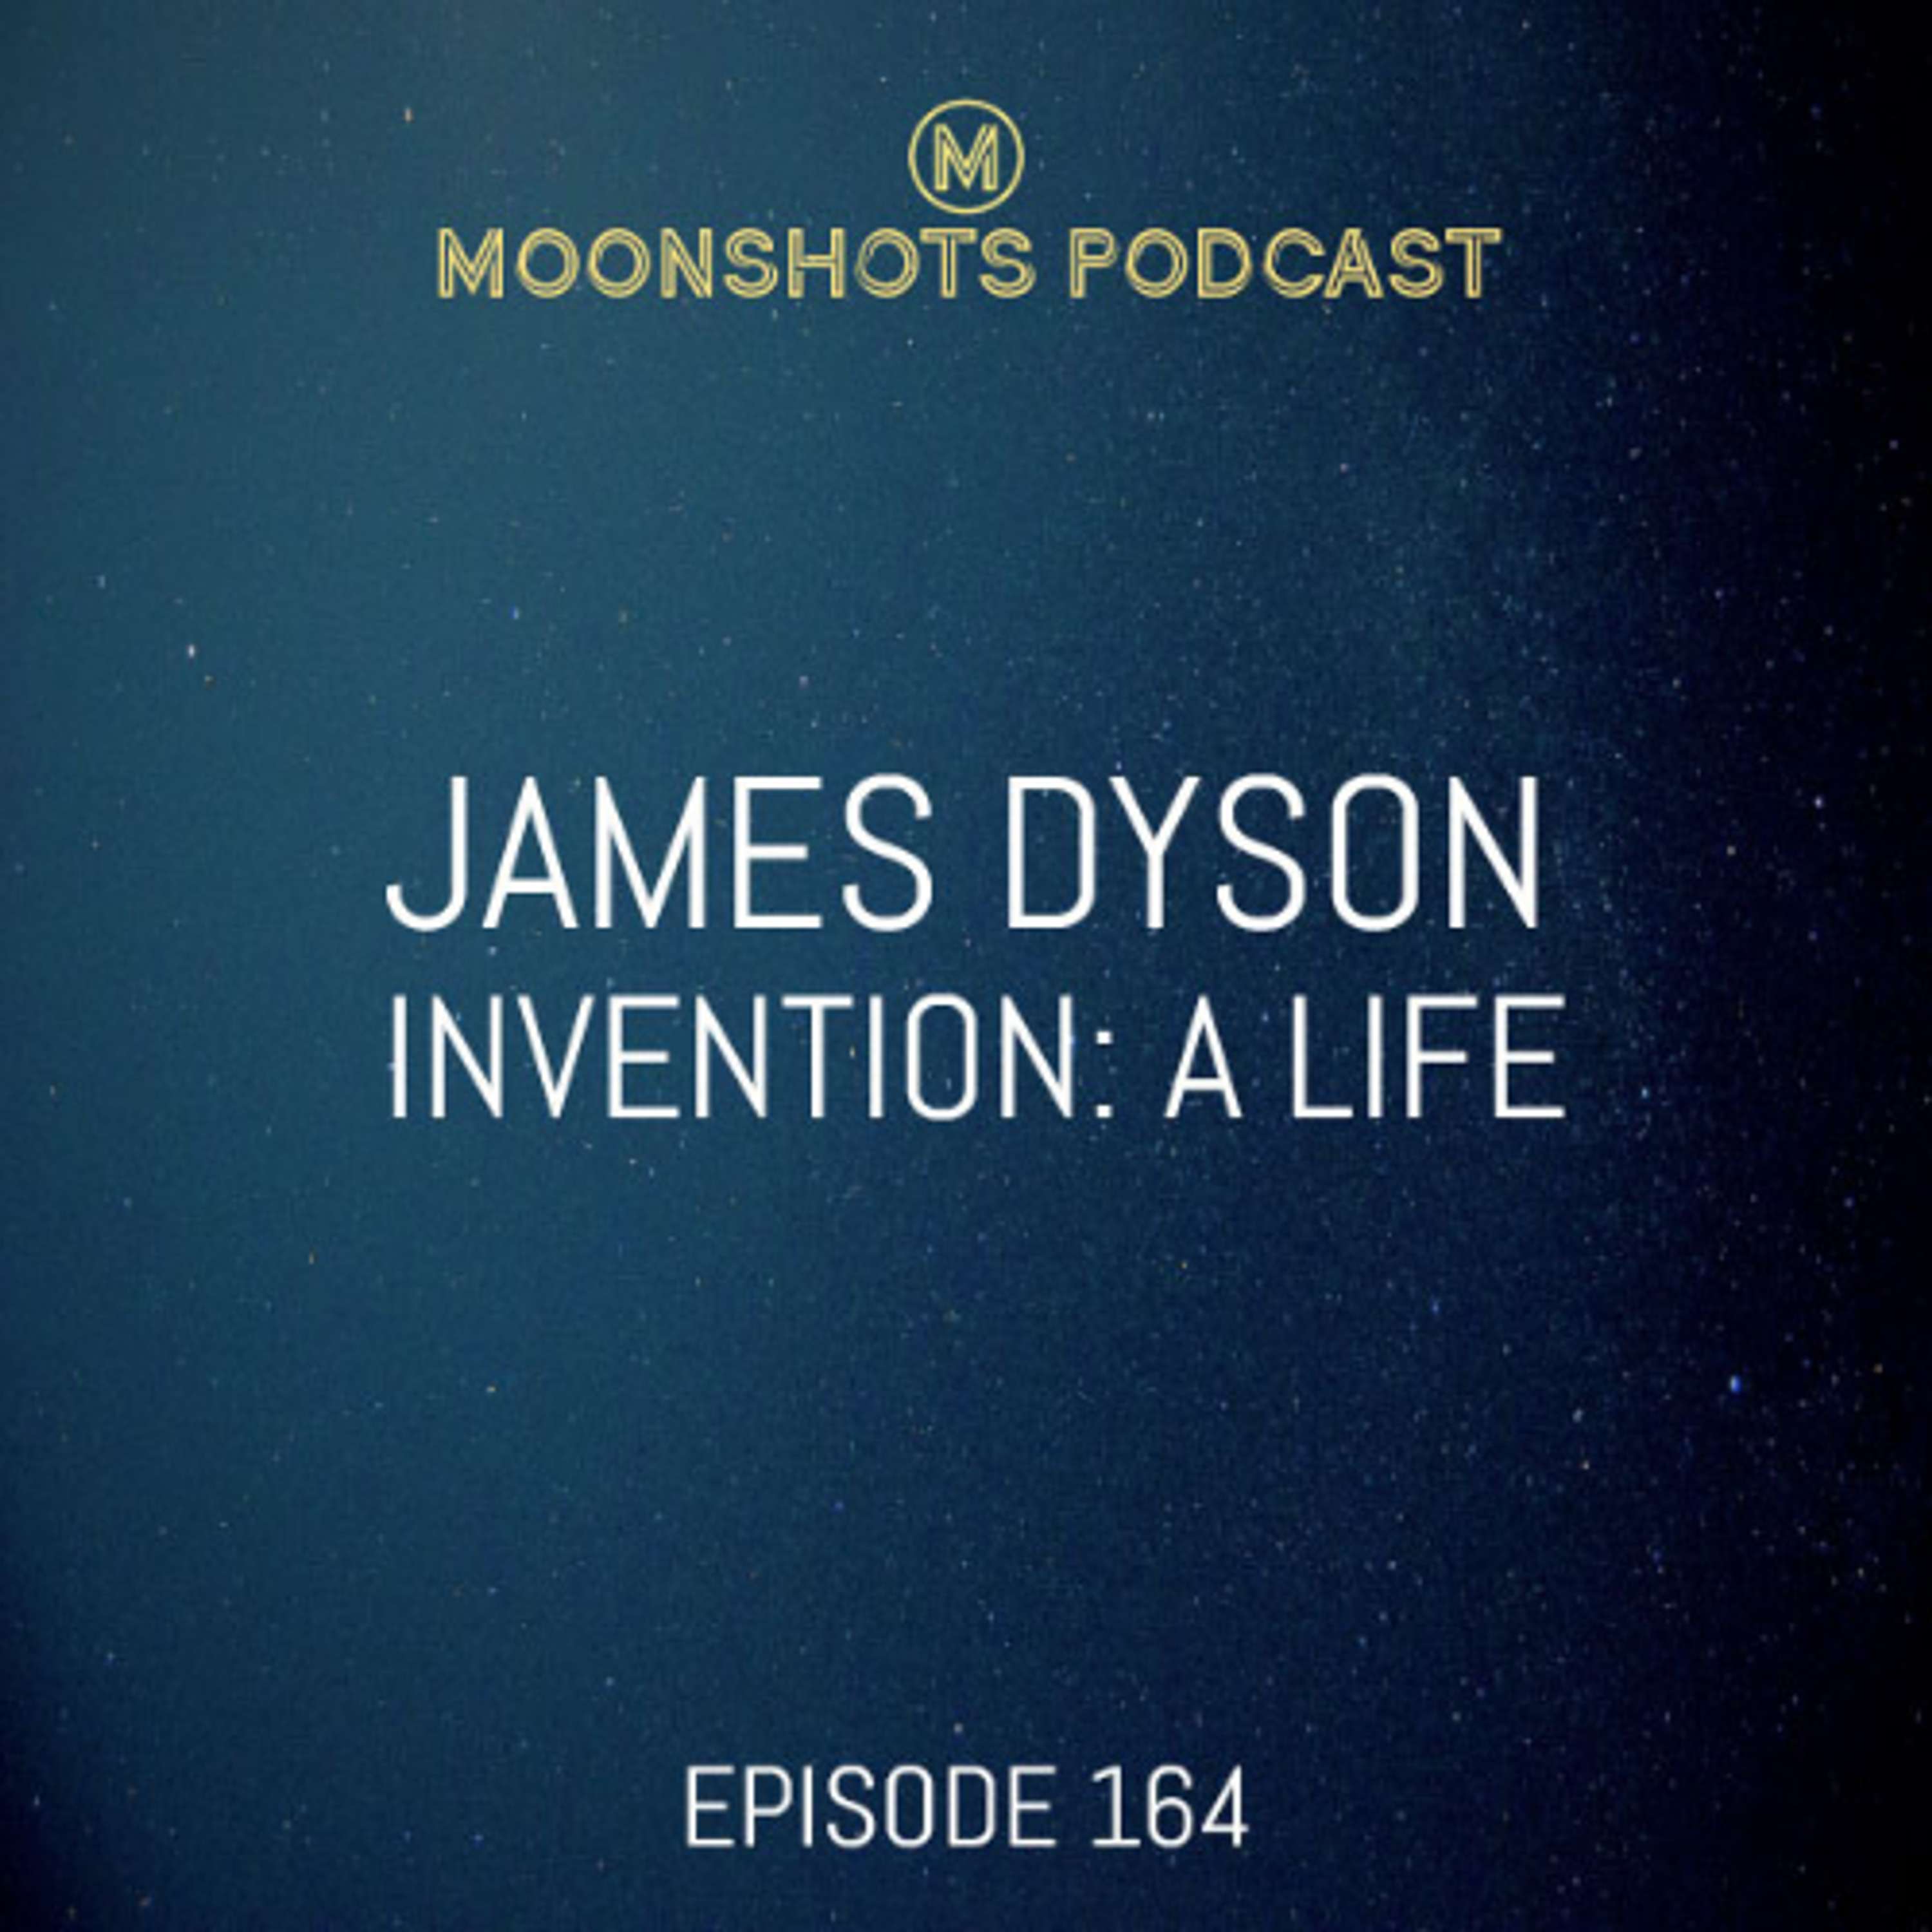 Sir James Dyson: How to Invent and Successfully Take Risks